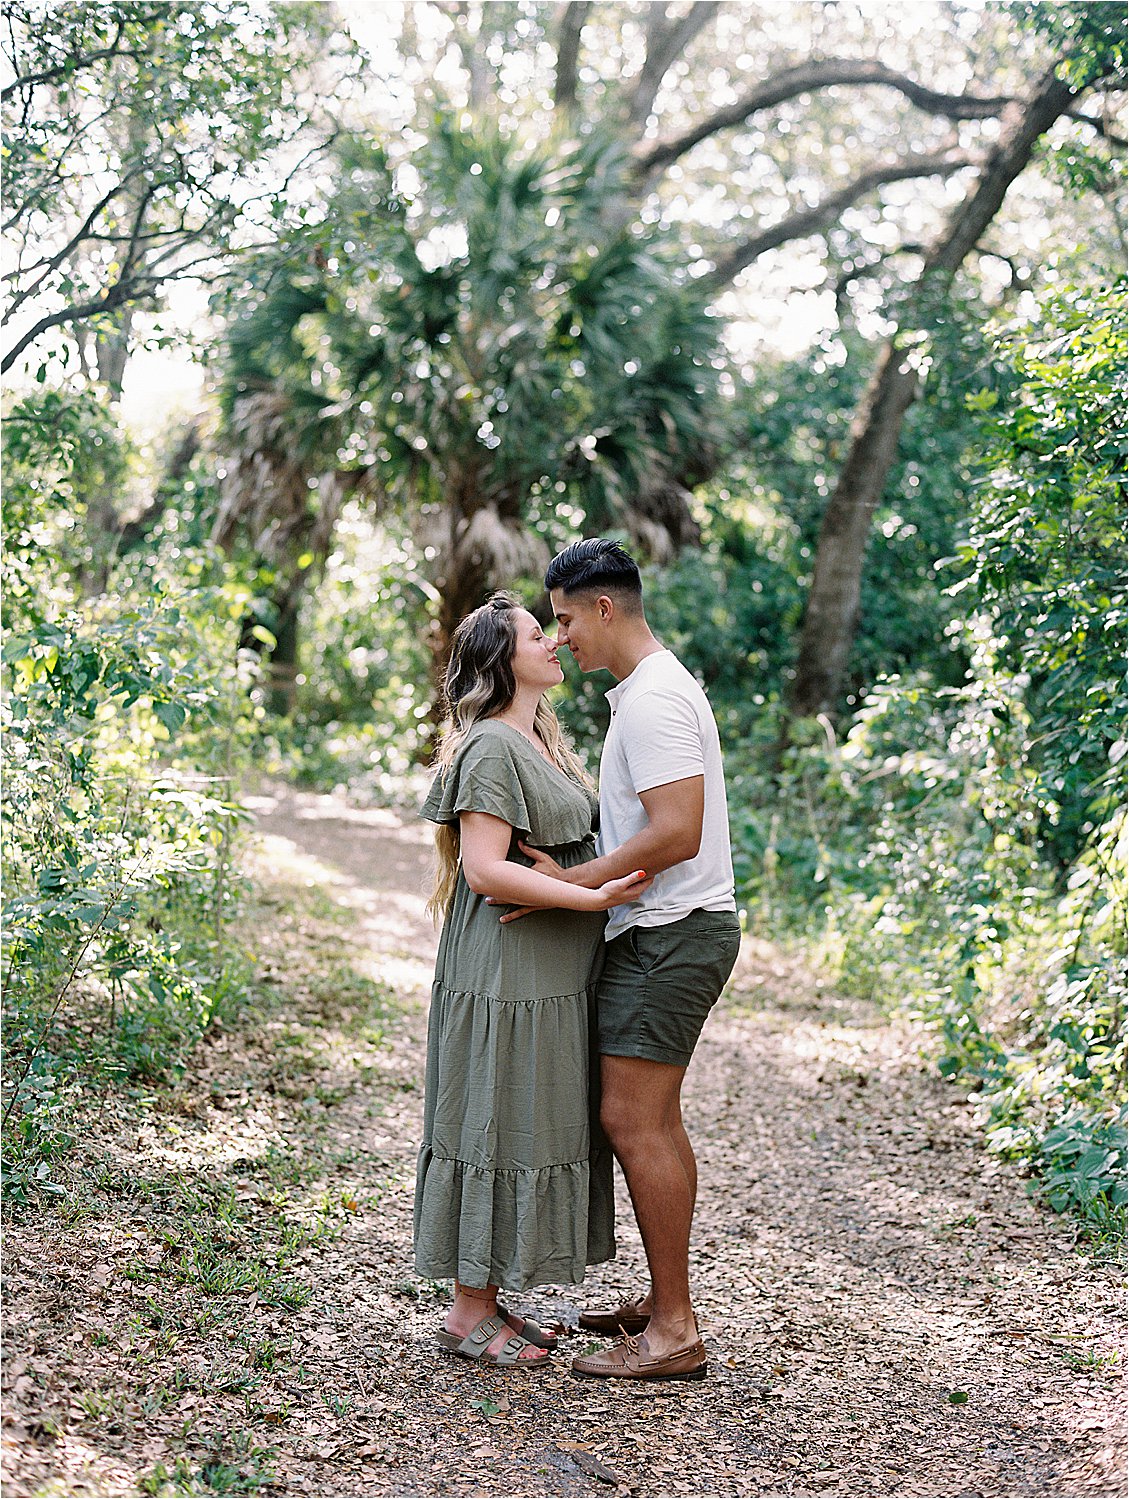 Summer maternity session in Florida hiking trail